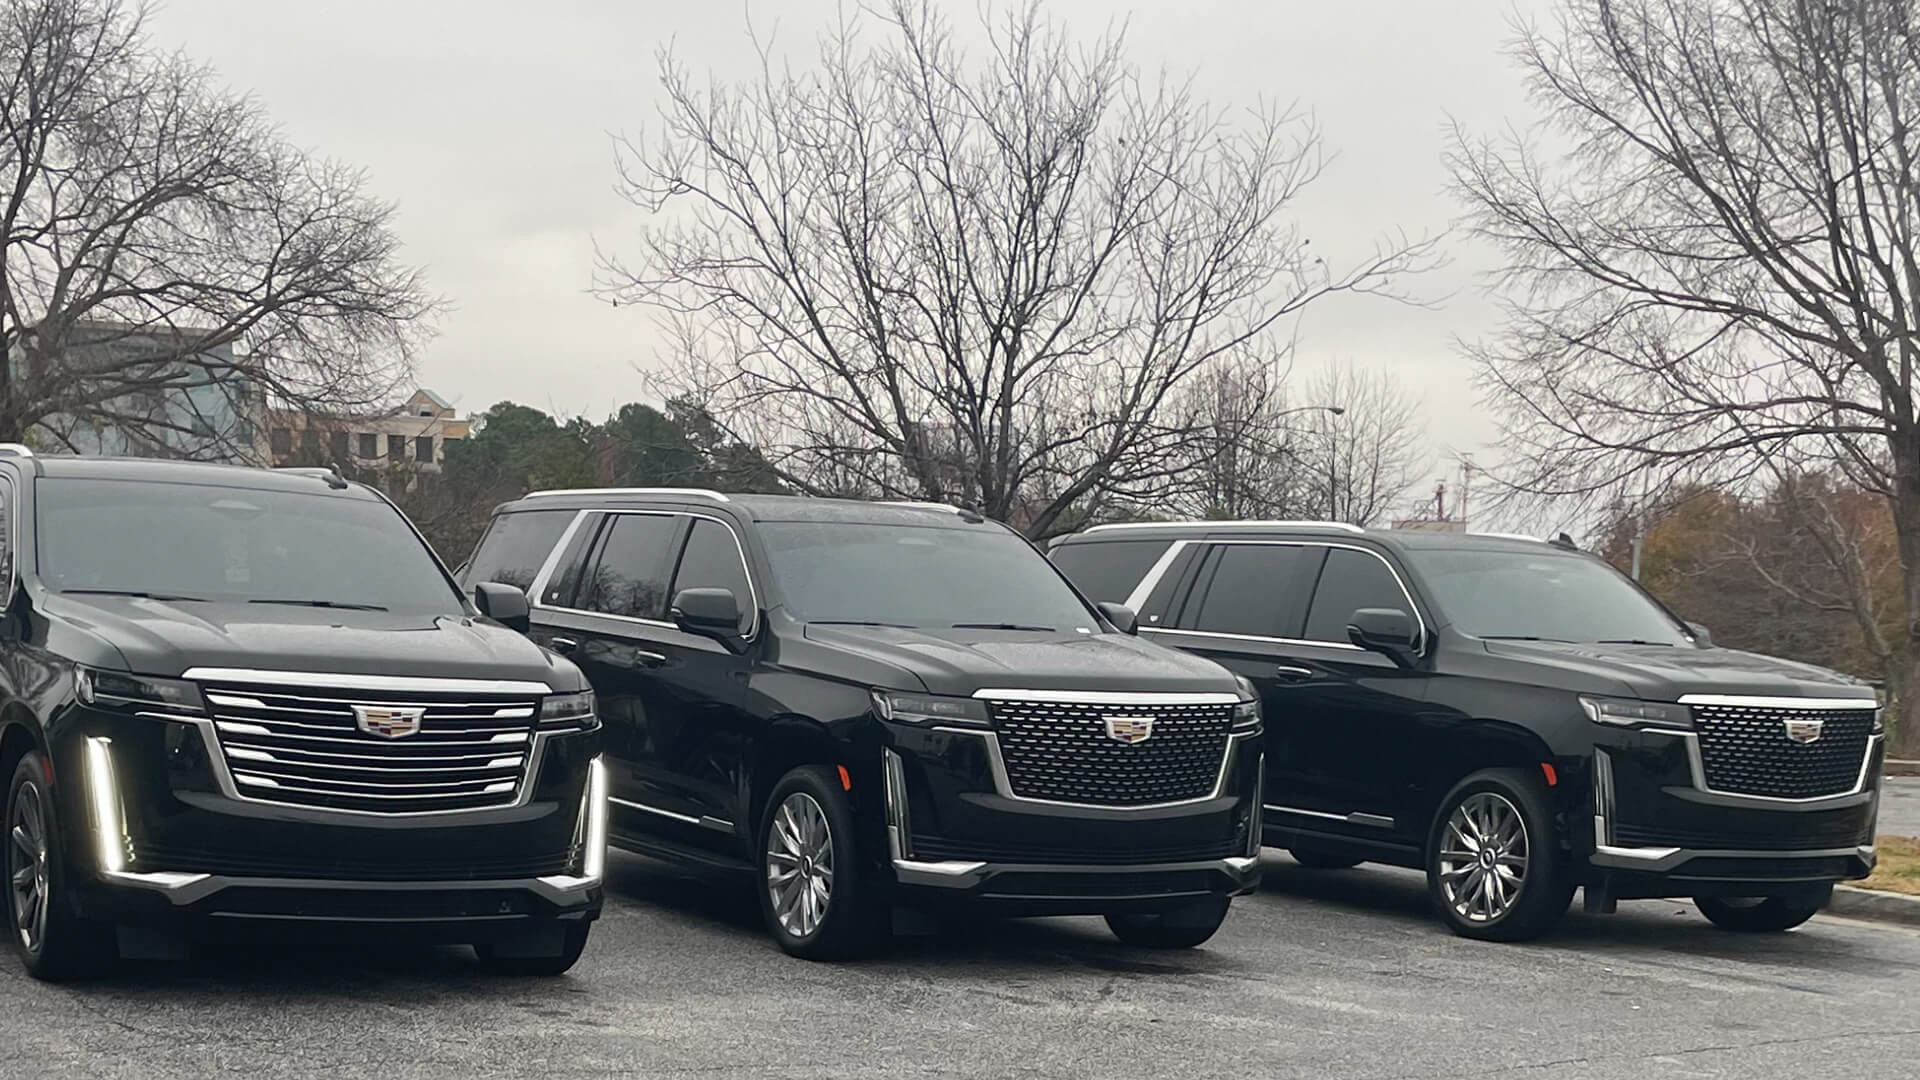 Alpharetta Limo Service, Limo Rental and Airport Limo Service